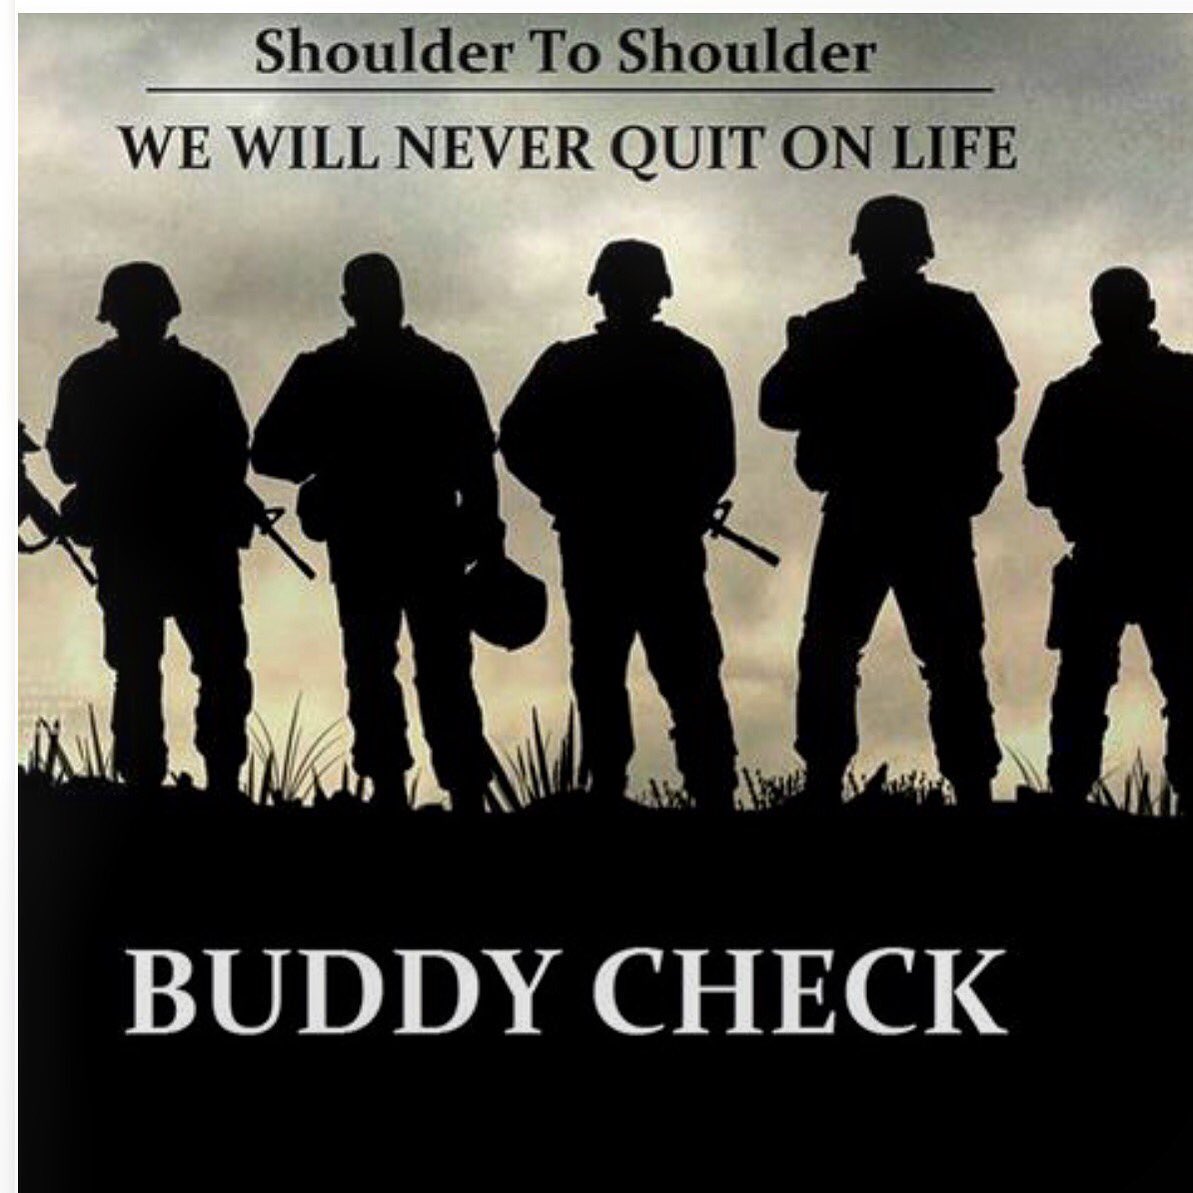 Buddy Check Wednesday 👊 Hope you're all doing well 👊 Lend an ear, reach out a hand 🤝 No battle is fought alone 👊